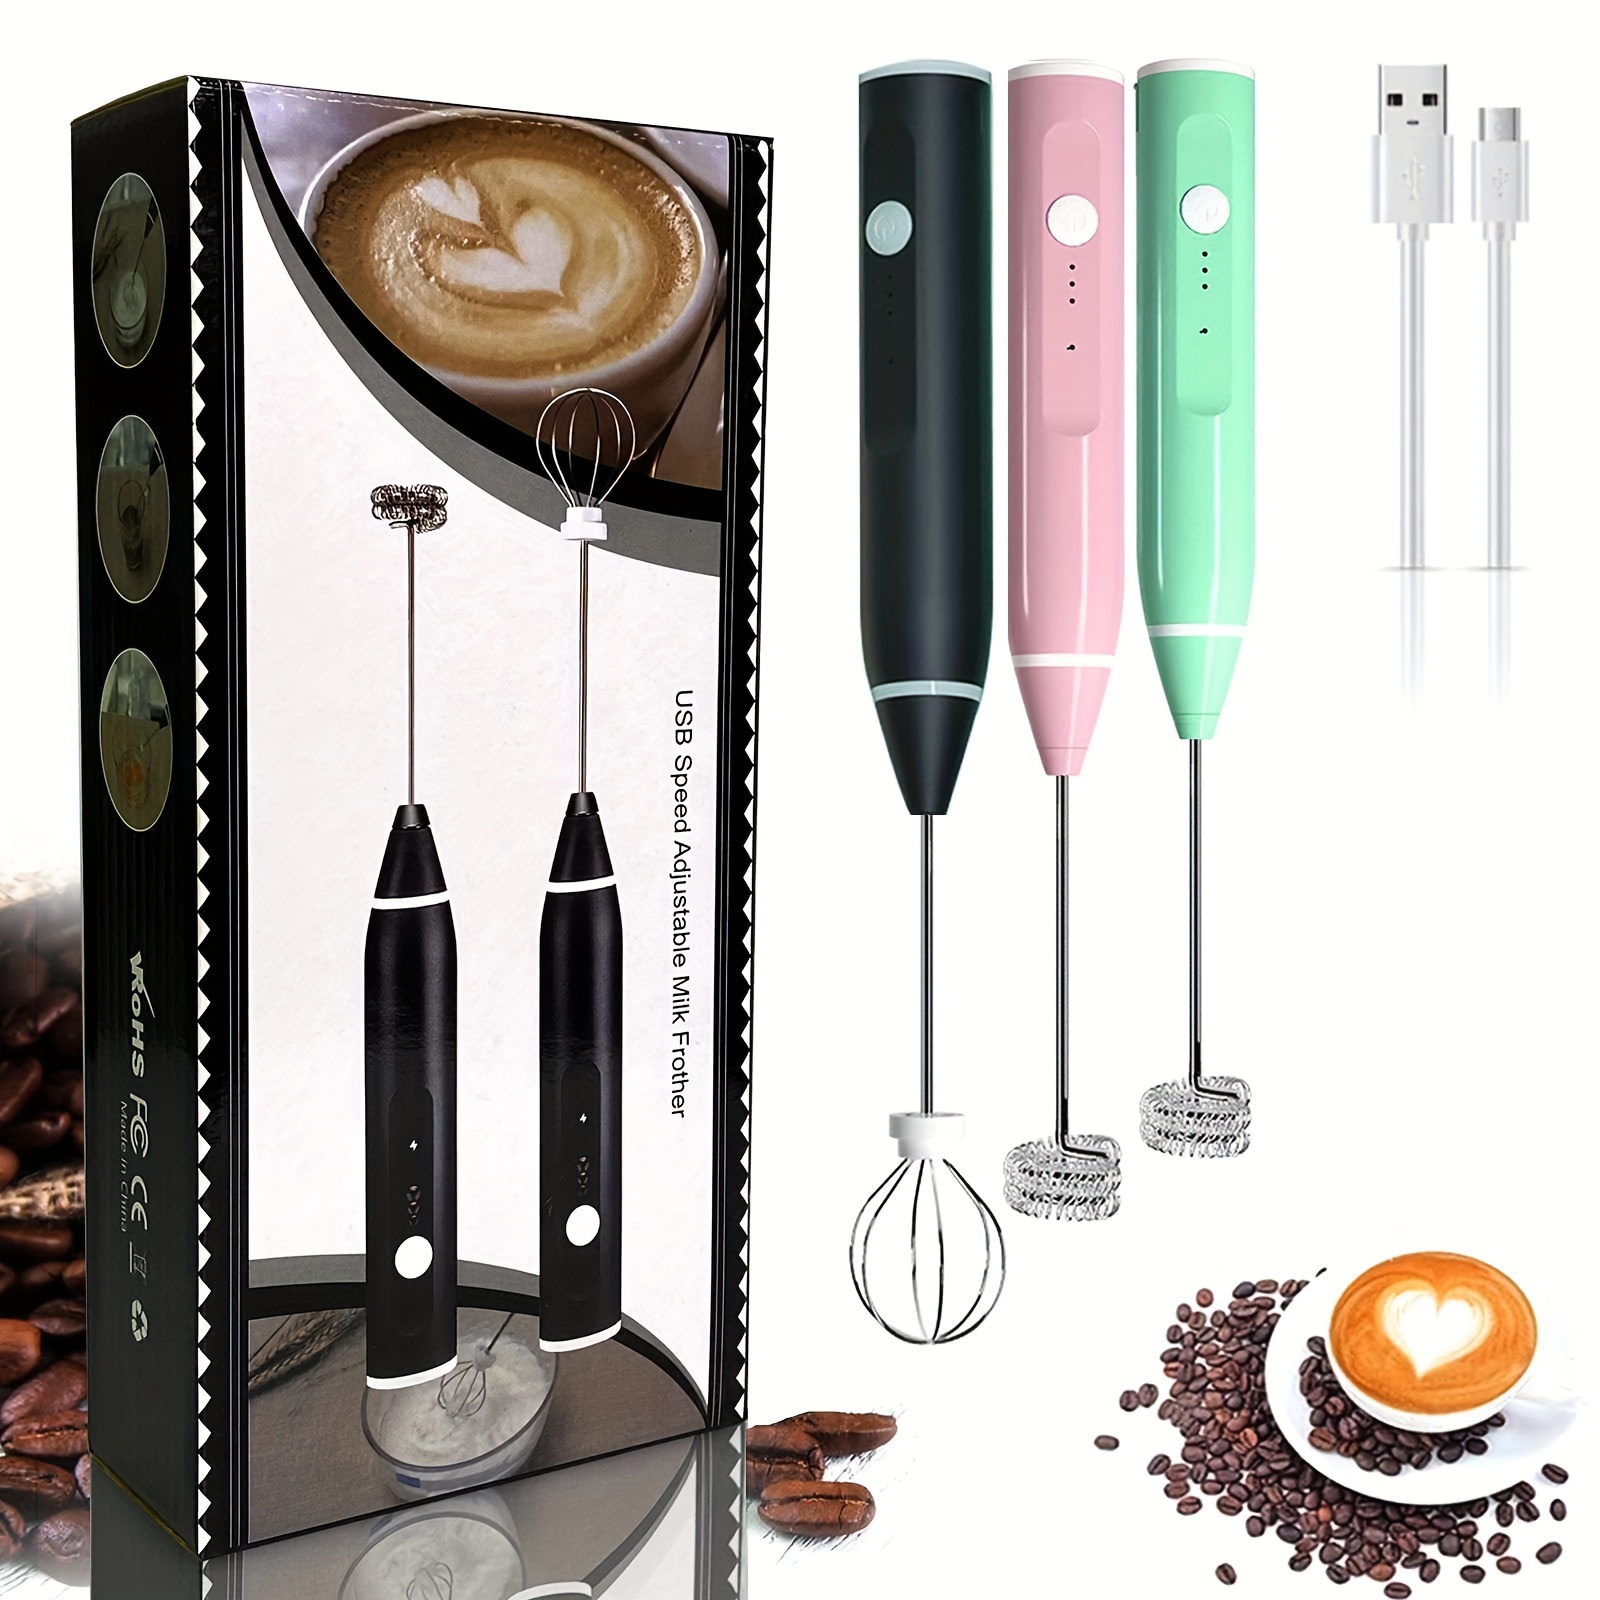  Rechargeable Milk Frother Handheld for Coffee, Electric Stirrer  with Wall Mounted Stand, Whisk Drink Mixer Wand, Milk Foamer for Matcha  Latte: Home & Kitchen